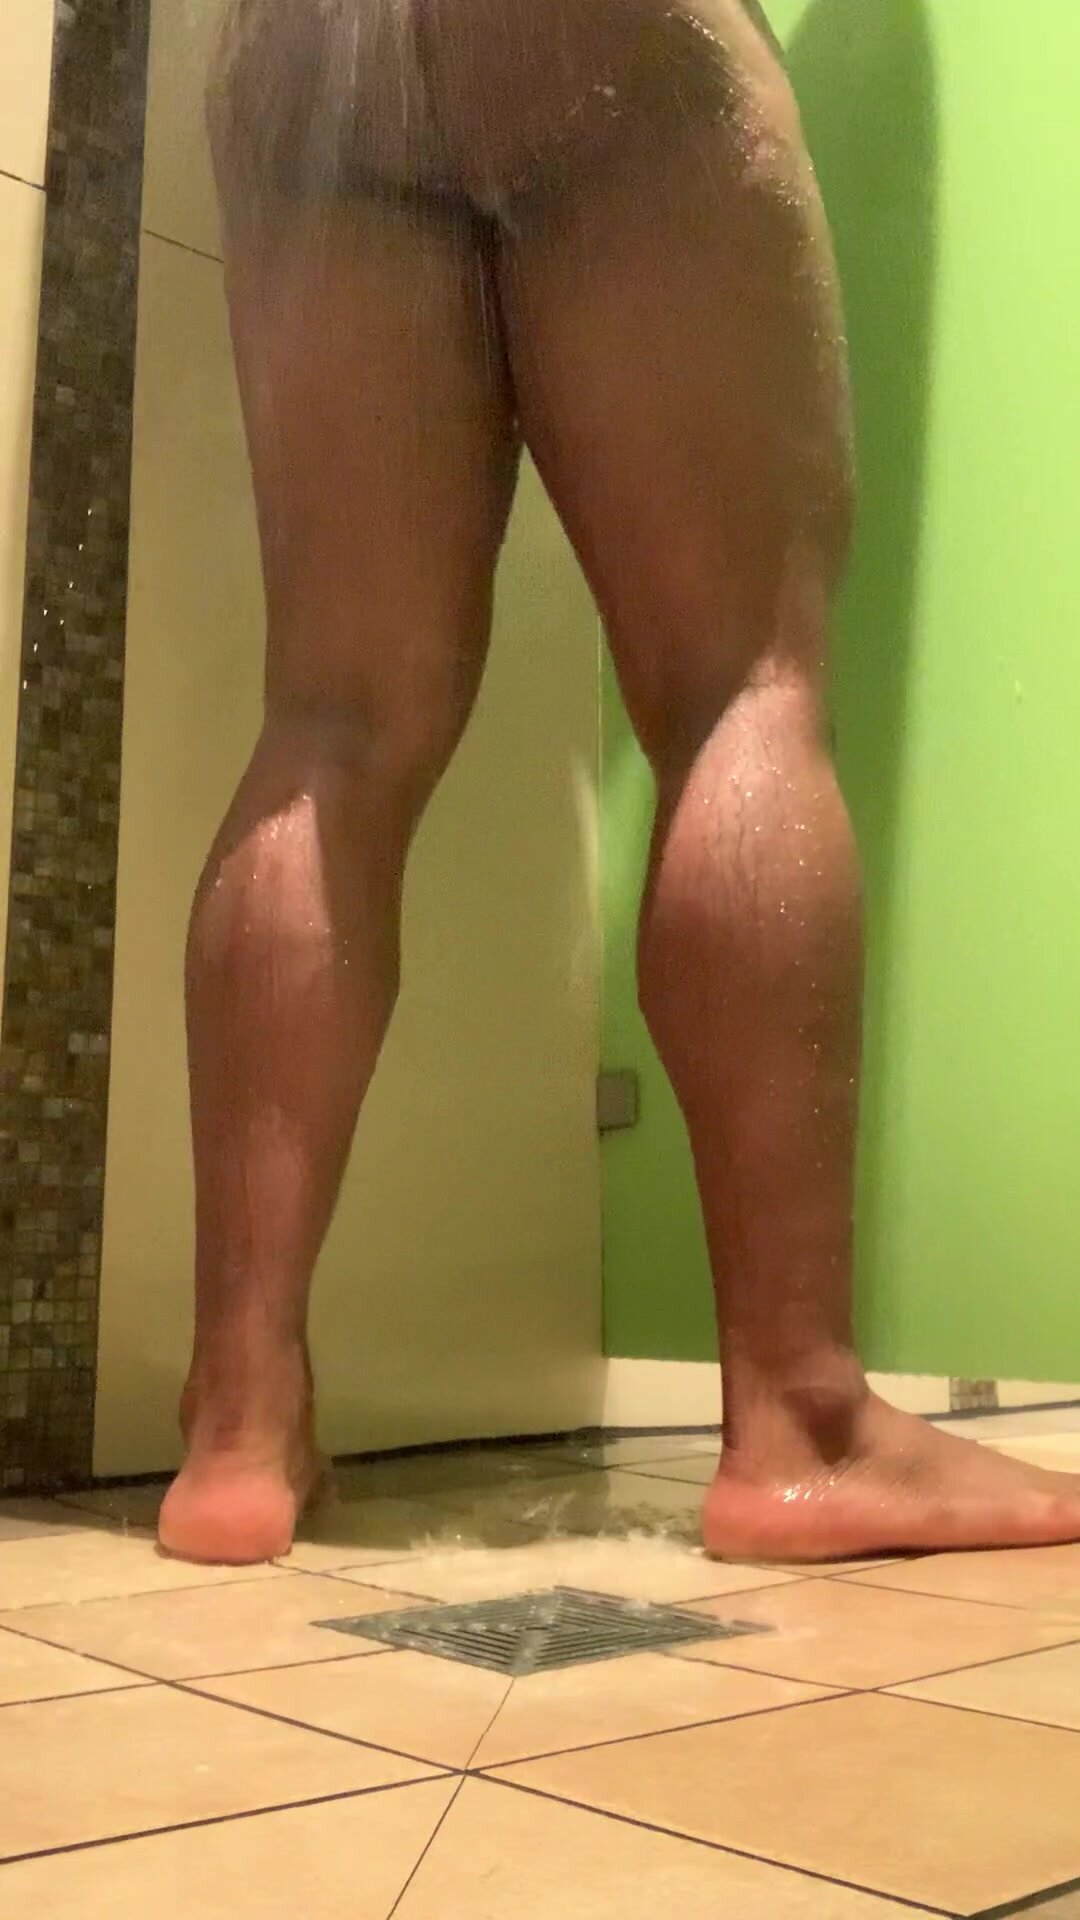 College Stud Films His SEXY Lower Body In The *SHOWER*!